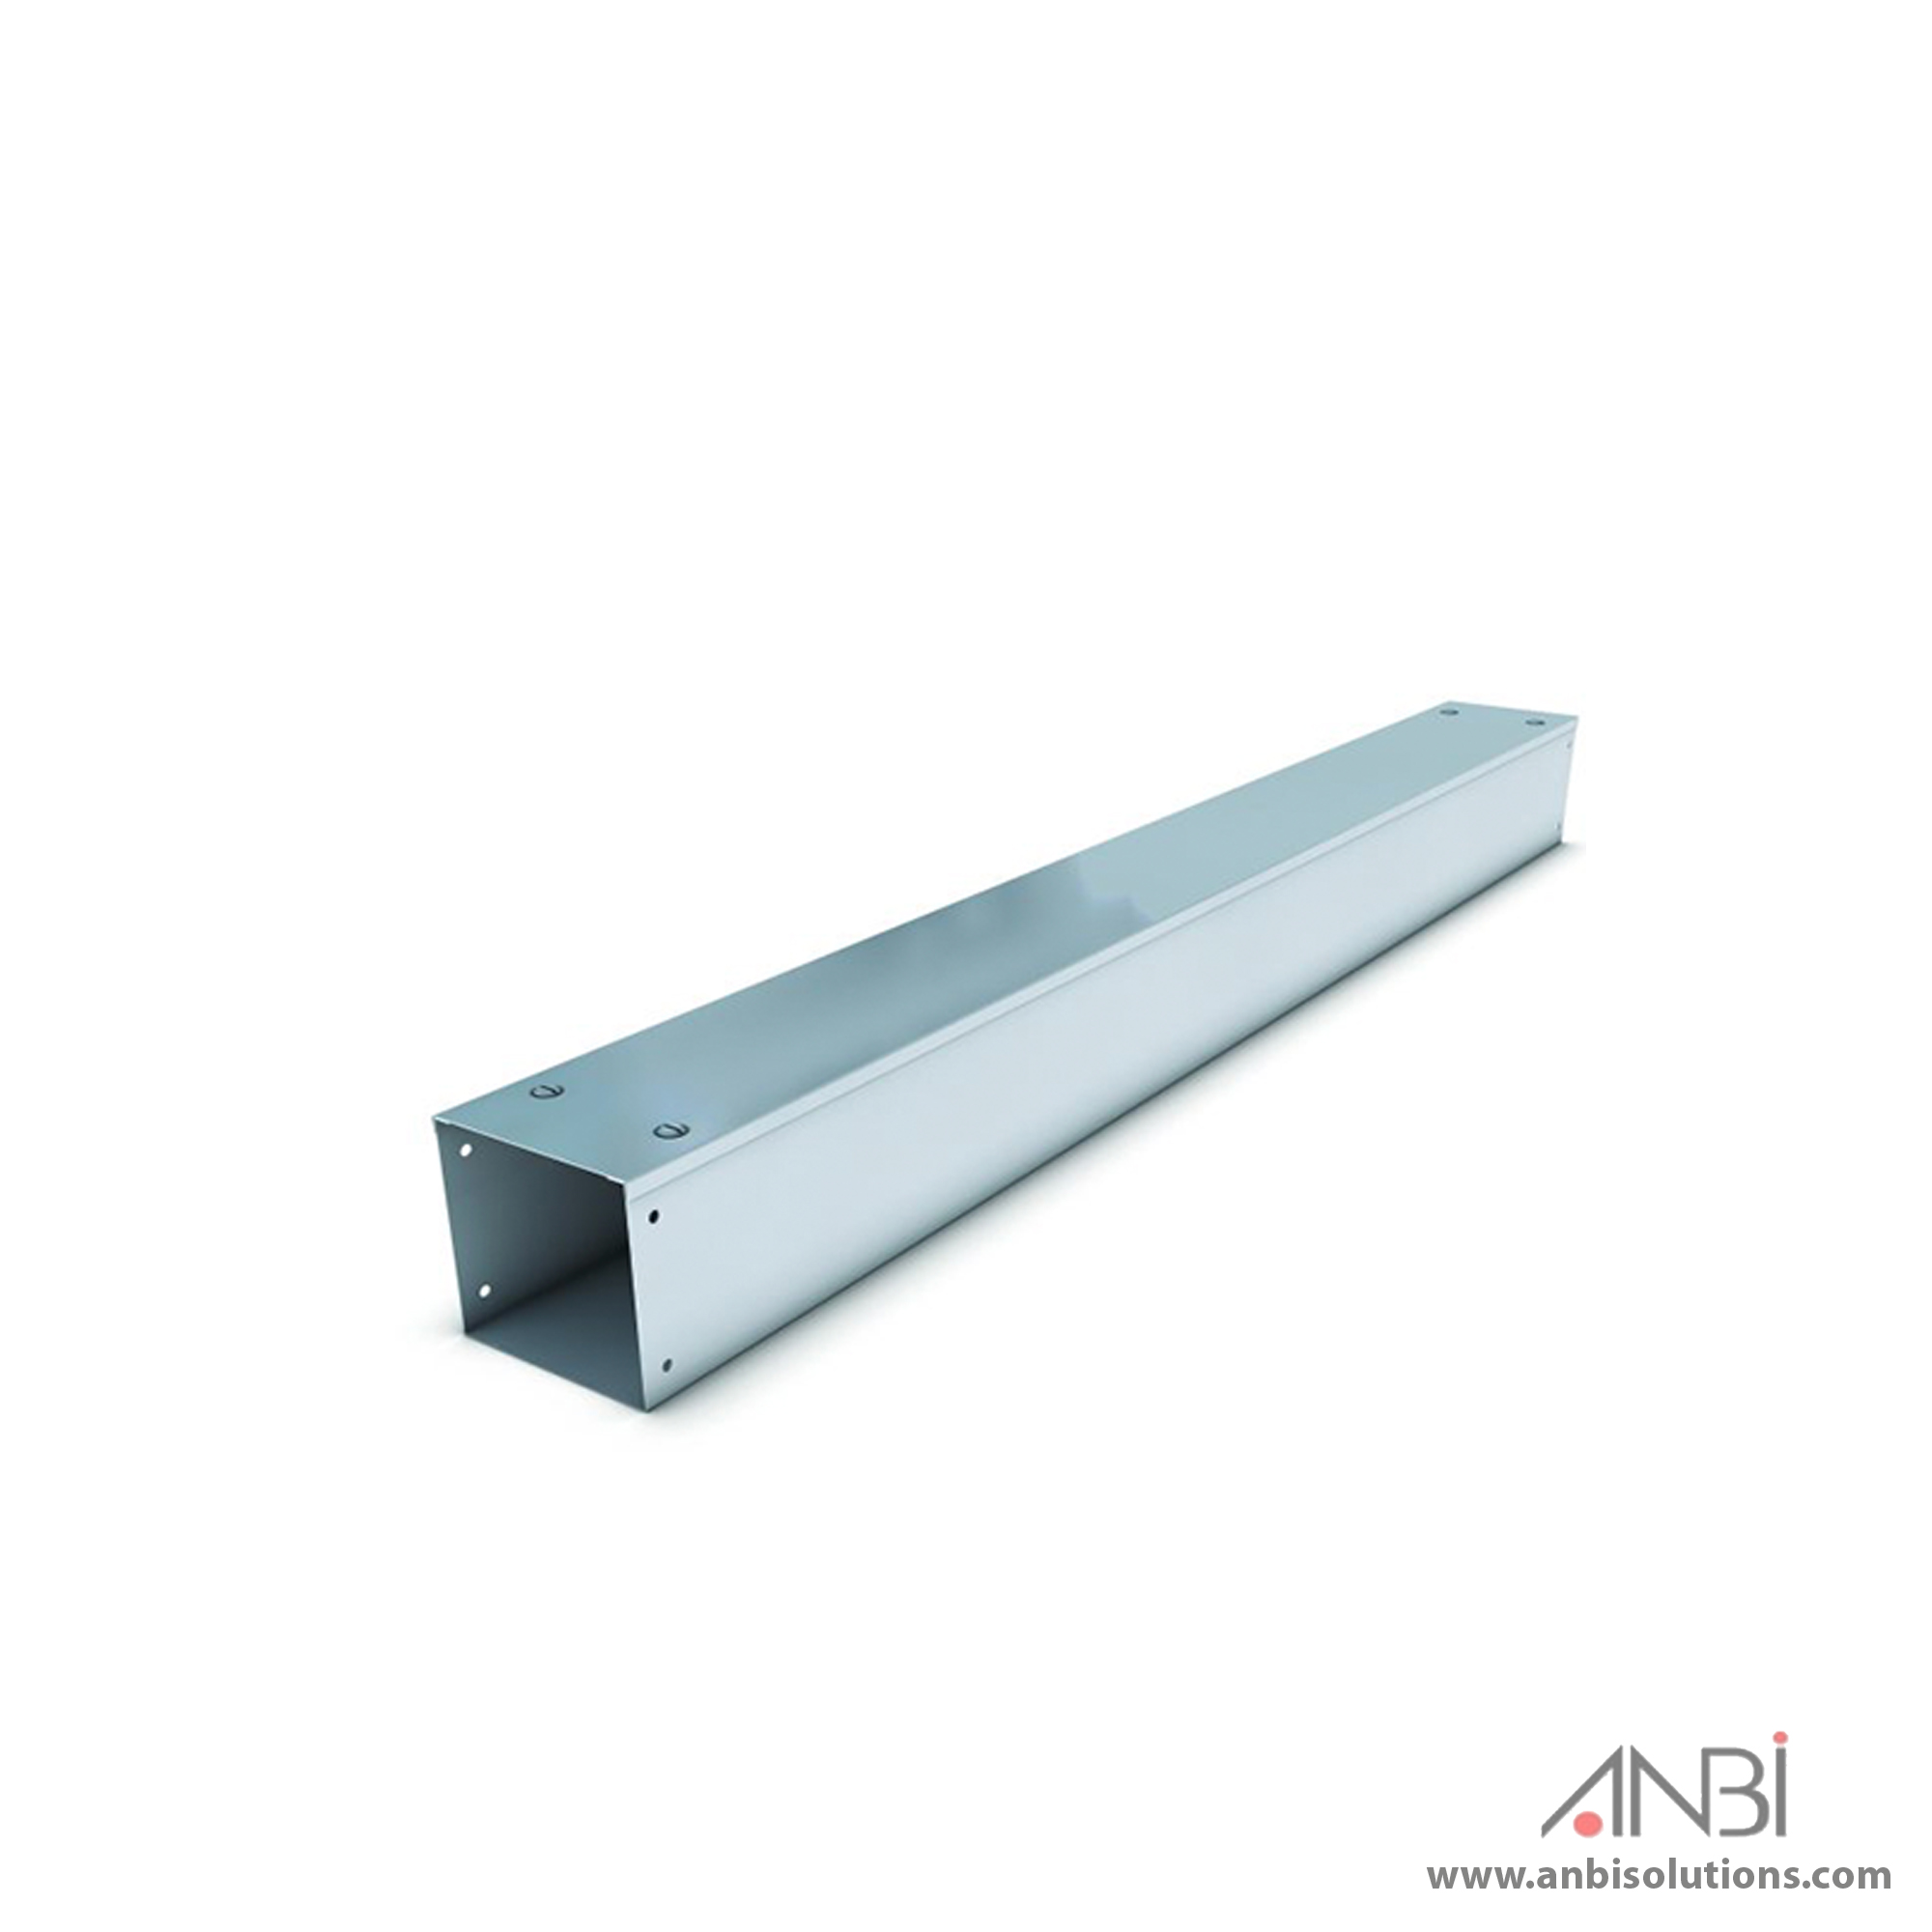 Cable Trunking GI W/ Cover Length 3mtr - ANBI Online